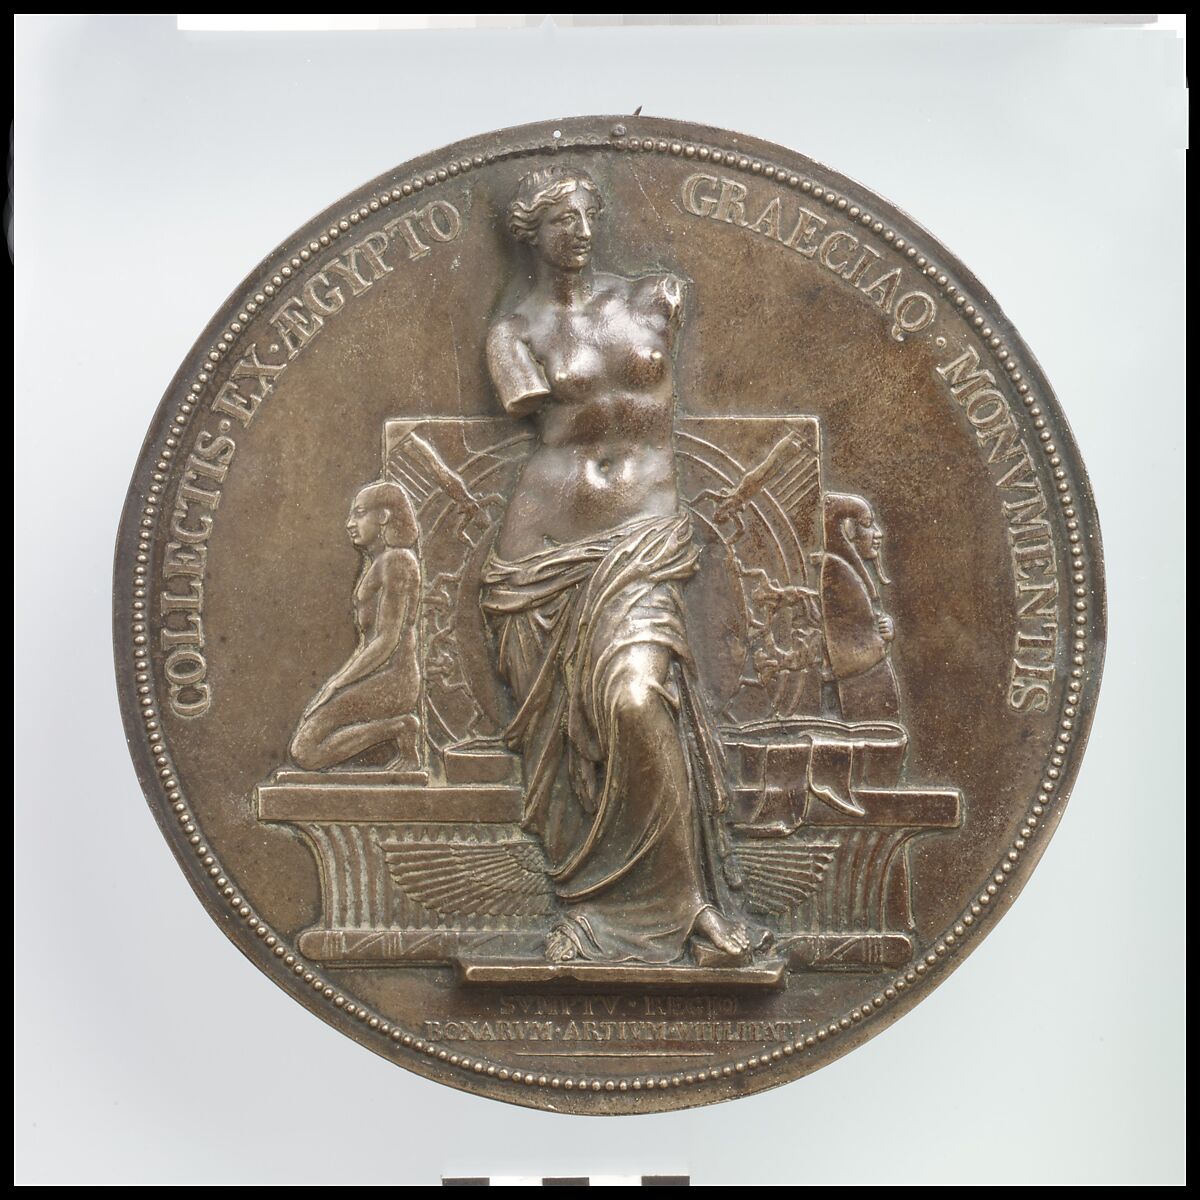 A uniface medal of the Ancient Greek and Egyptian Monuments of the Louvre, Medalist: Alexis Joseph Depaulis (French, Paris 1790–1867 Paris), Bronze, French 